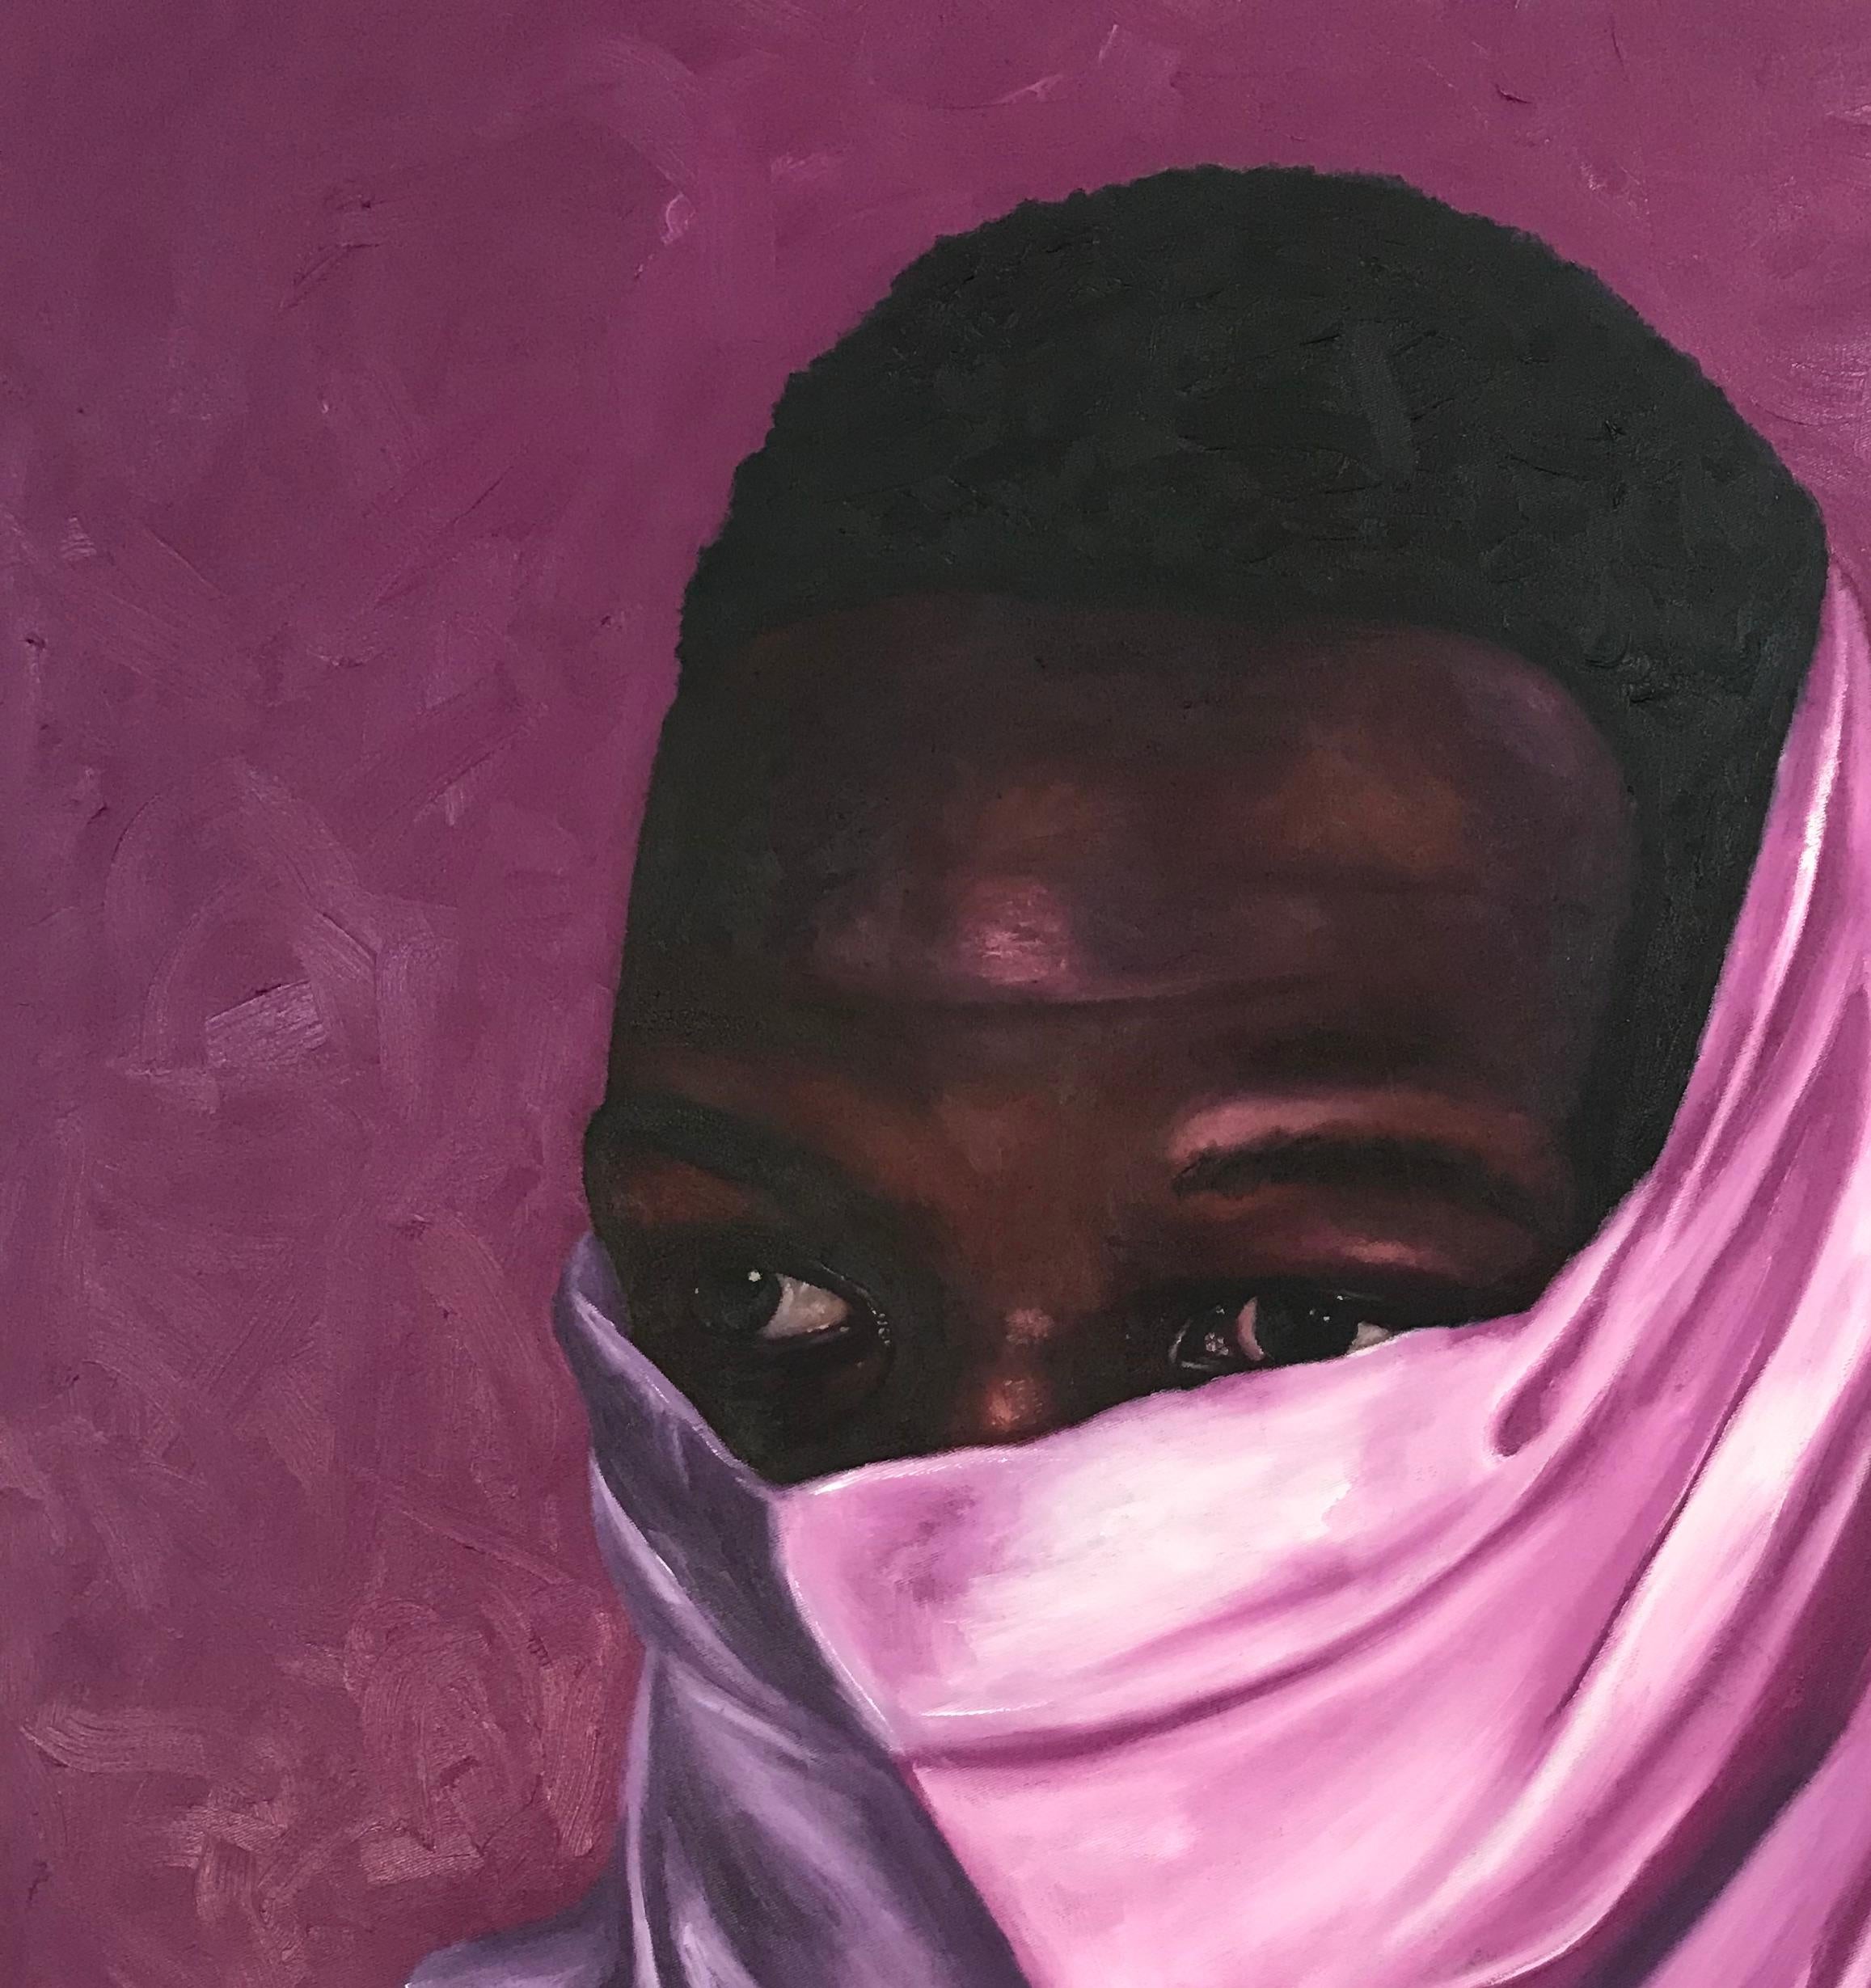 The Purple Veil: A Portrait of Youth and Mystery - Painting by Bakare Abubakri-sideeq Babatunde